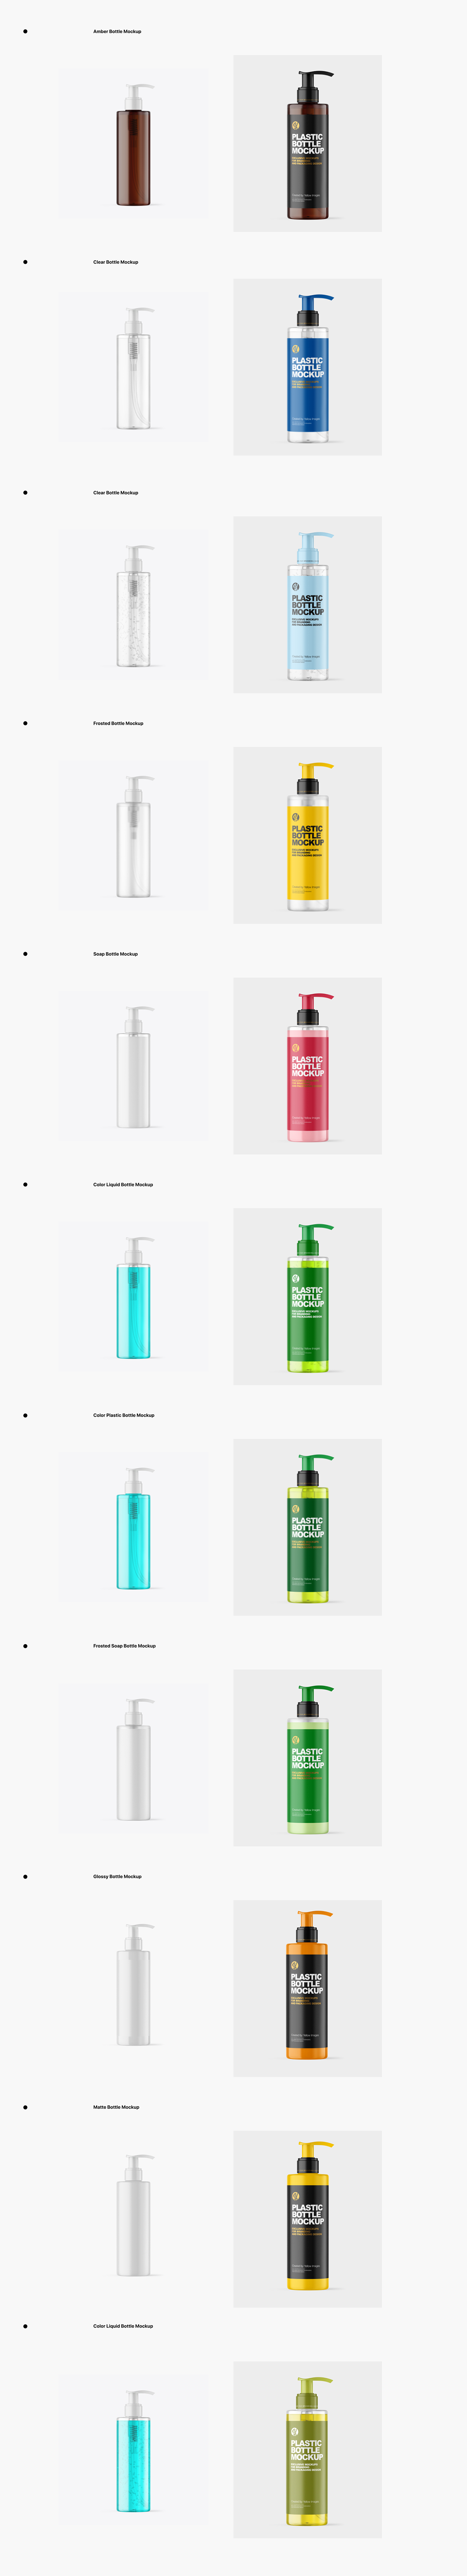 Download Download Amber Cosmetic Bottle Psd Mockup Yellowimages Yellowimages Mockups